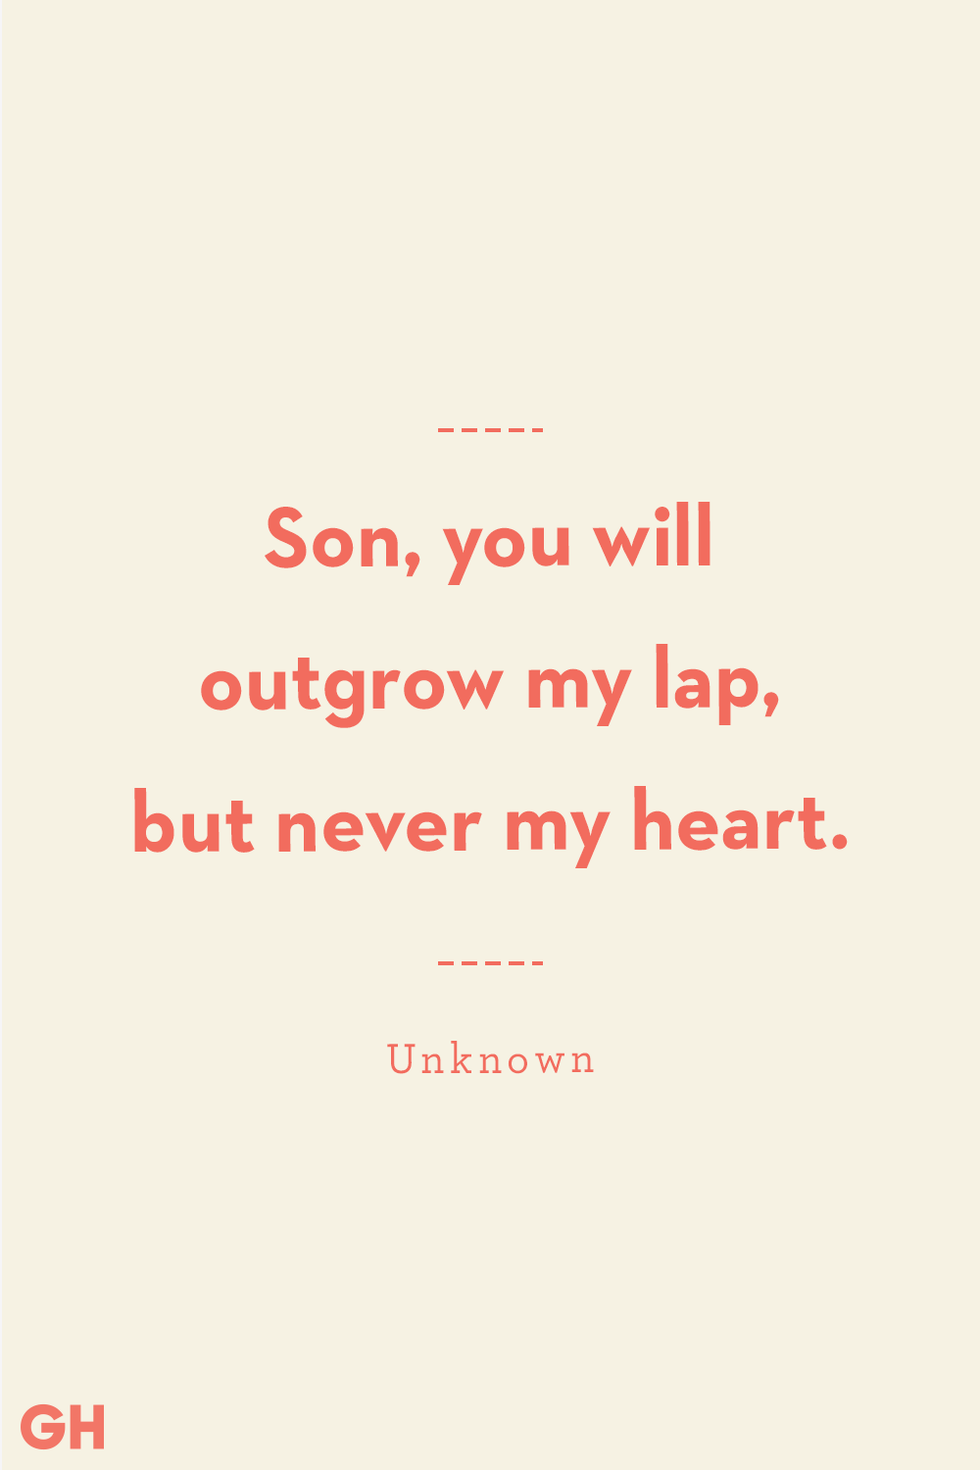 son, you will outgrow my lap, but never my heart